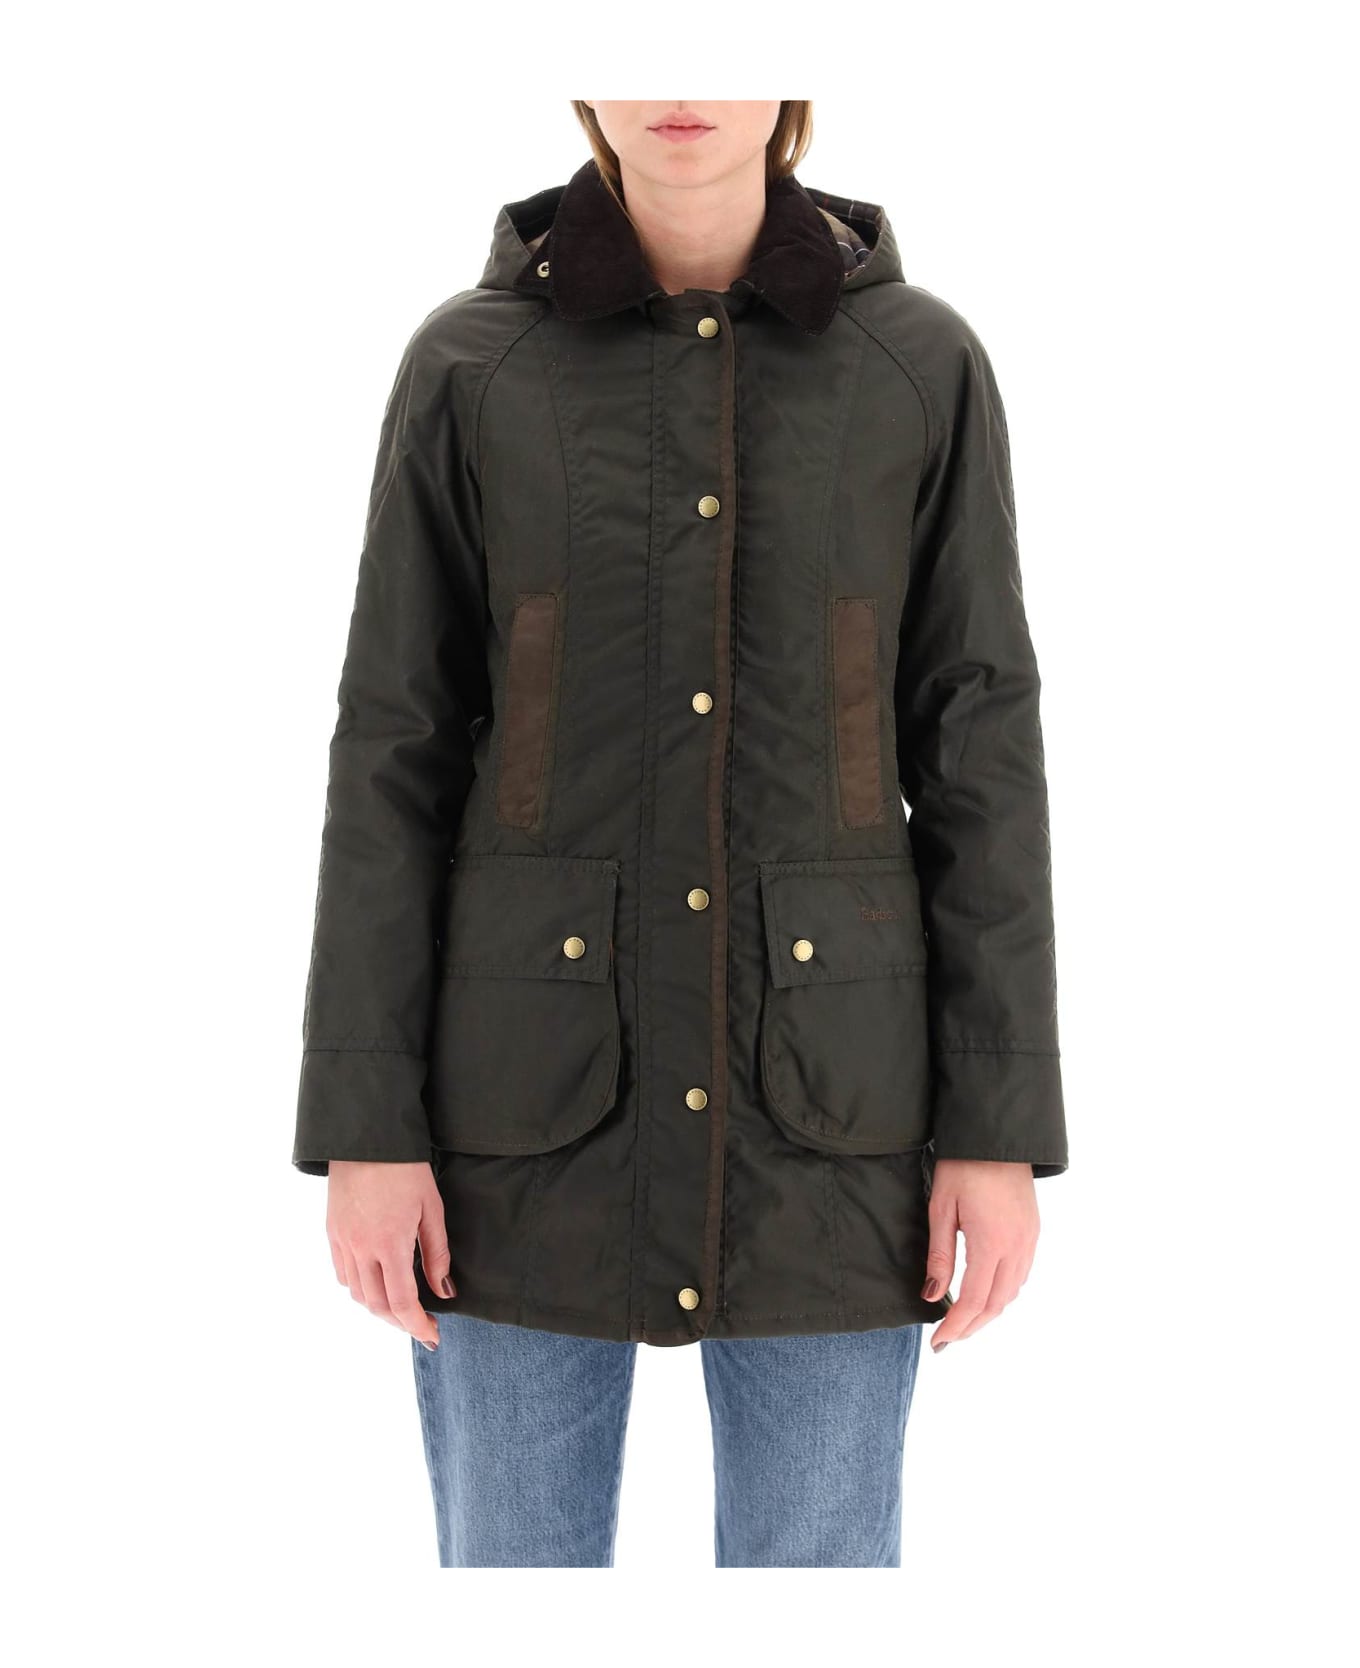 Barbour Bower Wax Jacket - OLIVE CLASSIC (Green)